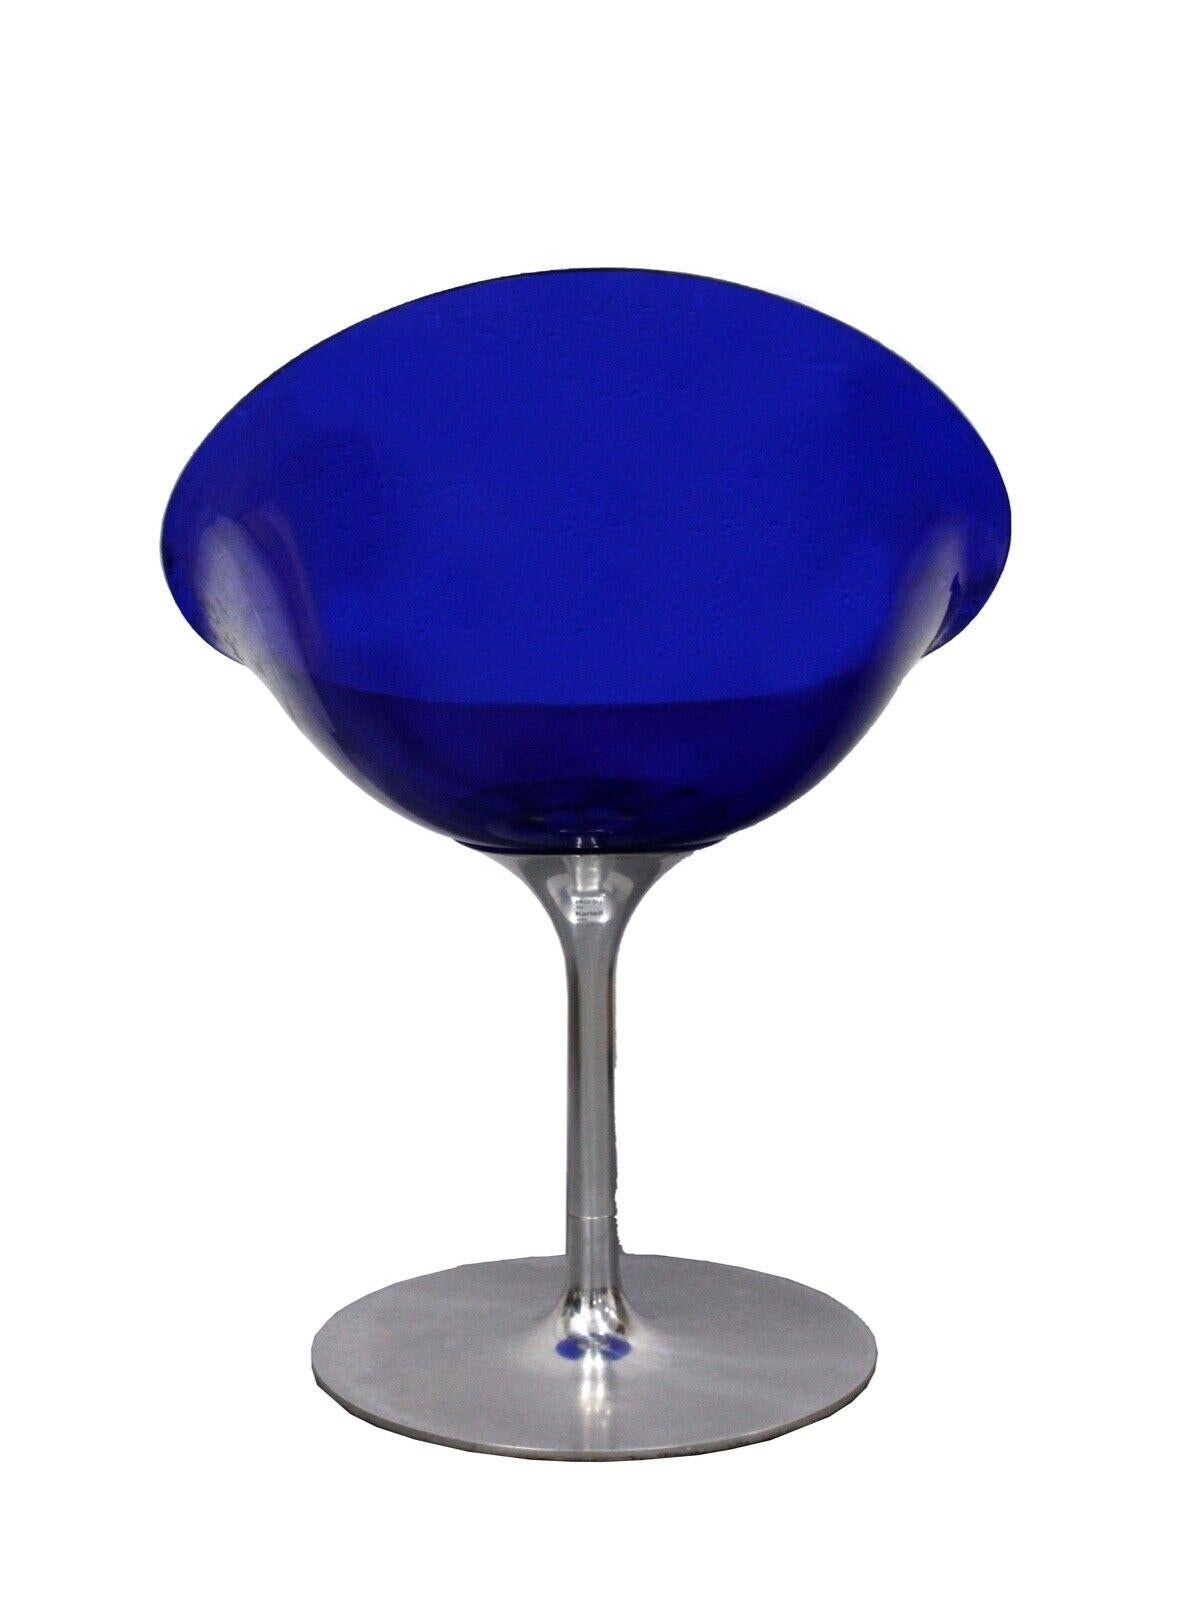 Philippe Starck for Kartell Ero S Blue Plastic & Chrome Swivel Chair Italy In Good Condition In Keego Harbor, MI